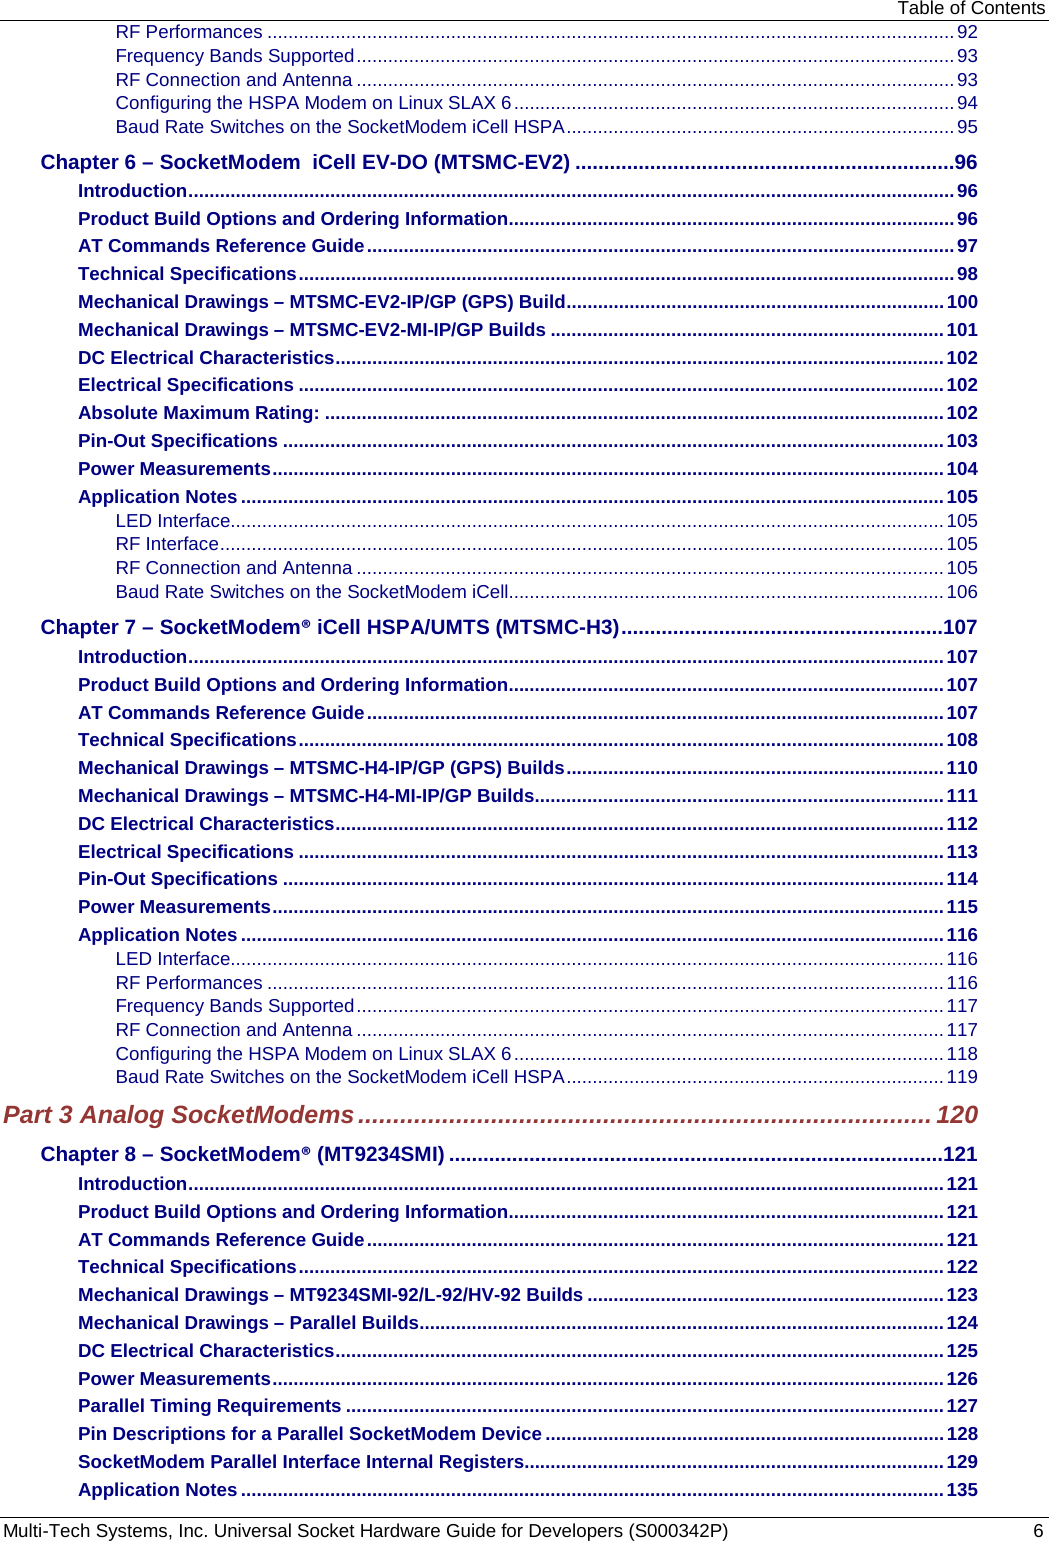 Table of Contents Multi-Tech Systems, Inc. Universal Socket Hardware Guide for Developers (S000342P)  6 RF Performances ................................................................................................................................... 92 Frequency Bands Supported .................................................................................................................. 93 RF Connection and Antenna .................................................................................................................. 93 Configuring the HSPA Modem on Linux SLAX 6 .................................................................................... 94 Baud Rate Switches on the SocketModem iCell HSPA .......................................................................... 95 Chapter 6 – SocketModem  iCell EV-DO (MTSMC-EV2) ..................................................................96 Introduction .................................................................................................................................................. 96 Product Build Options and Ordering Information ..................................................................................... 96 AT Commands Reference Guide ................................................................................................................ 97 Technical Specifications ............................................................................................................................. 98 Mechanical Drawings – MTSMC-EV2-IP/GP (GPS) Build ........................................................................ 100 Mechanical Drawings – MTSMC-EV2-MI-IP/GP Builds ........................................................................... 101 DC Electrical Characteristics .................................................................................................................... 102 Electrical Specifications ........................................................................................................................... 102 Absolute Maximum Rating: ...................................................................................................................... 102 Pin-Out Specifications .............................................................................................................................. 103 Power Measurements ................................................................................................................................ 104 Application Notes ...................................................................................................................................... 105 LED Interface........................................................................................................................................ 105 RF Interface .......................................................................................................................................... 105 RF Connection and Antenna ................................................................................................................ 105 Baud Rate Switches on the SocketModem iCell ................................................................................... 106 Chapter 7 – SocketModem® iCell HSPA/UMTS (MTSMC-H3) ........................................................107 Introduction ................................................................................................................................................ 107 Product Build Options and Ordering Information ................................................................................... 107 AT Commands Reference Guide .............................................................................................................. 107 Technical Specifications ........................................................................................................................... 108 Mechanical Drawings – MTSMC-H4-IP/GP (GPS) Builds ........................................................................ 110 Mechanical Drawings – MTSMC-H4-MI-IP/GP Builds .............................................................................. 111 DC Electrical Characteristics .................................................................................................................... 112 Electrical Specifications ........................................................................................................................... 113 Pin-Out Specifications .............................................................................................................................. 114 Power Measurements ................................................................................................................................ 115 Application Notes ...................................................................................................................................... 116 LED Interface........................................................................................................................................ 116 RF Performances ................................................................................................................................. 116 Frequency Bands Supported ................................................................................................................ 117 RF Connection and Antenna ................................................................................................................ 117 Configuring the HSPA Modem on Linux SLAX 6 .................................................................................. 118 Baud Rate Switches on the SocketModem iCell HSPA ........................................................................ 119 Part 3 Analog SocketModems .................................................................................. 120 Chapter 8 – SocketModem® (MT9234SMI) ......................................................................................121 Introduction ................................................................................................................................................ 121 Product Build Options and Ordering Information ................................................................................... 121 AT Commands Reference Guide .............................................................................................................. 121 Technical Specifications ........................................................................................................................... 122 Mechanical Drawings – MT9234SMI-92/L-92/HV-92 Builds .................................................................... 123 Mechanical Drawings – Parallel Builds .................................................................................................... 124 DC Electrical Characteristics .................................................................................................................... 125 Power Measurements ................................................................................................................................ 126 Parallel Timing Requirements .................................................................................................................. 127 Pin Descriptions for a Parallel SocketModem Device ............................................................................ 128 SocketModem Parallel Interface Internal Registers................................................................................ 129 Application Notes ...................................................................................................................................... 135 